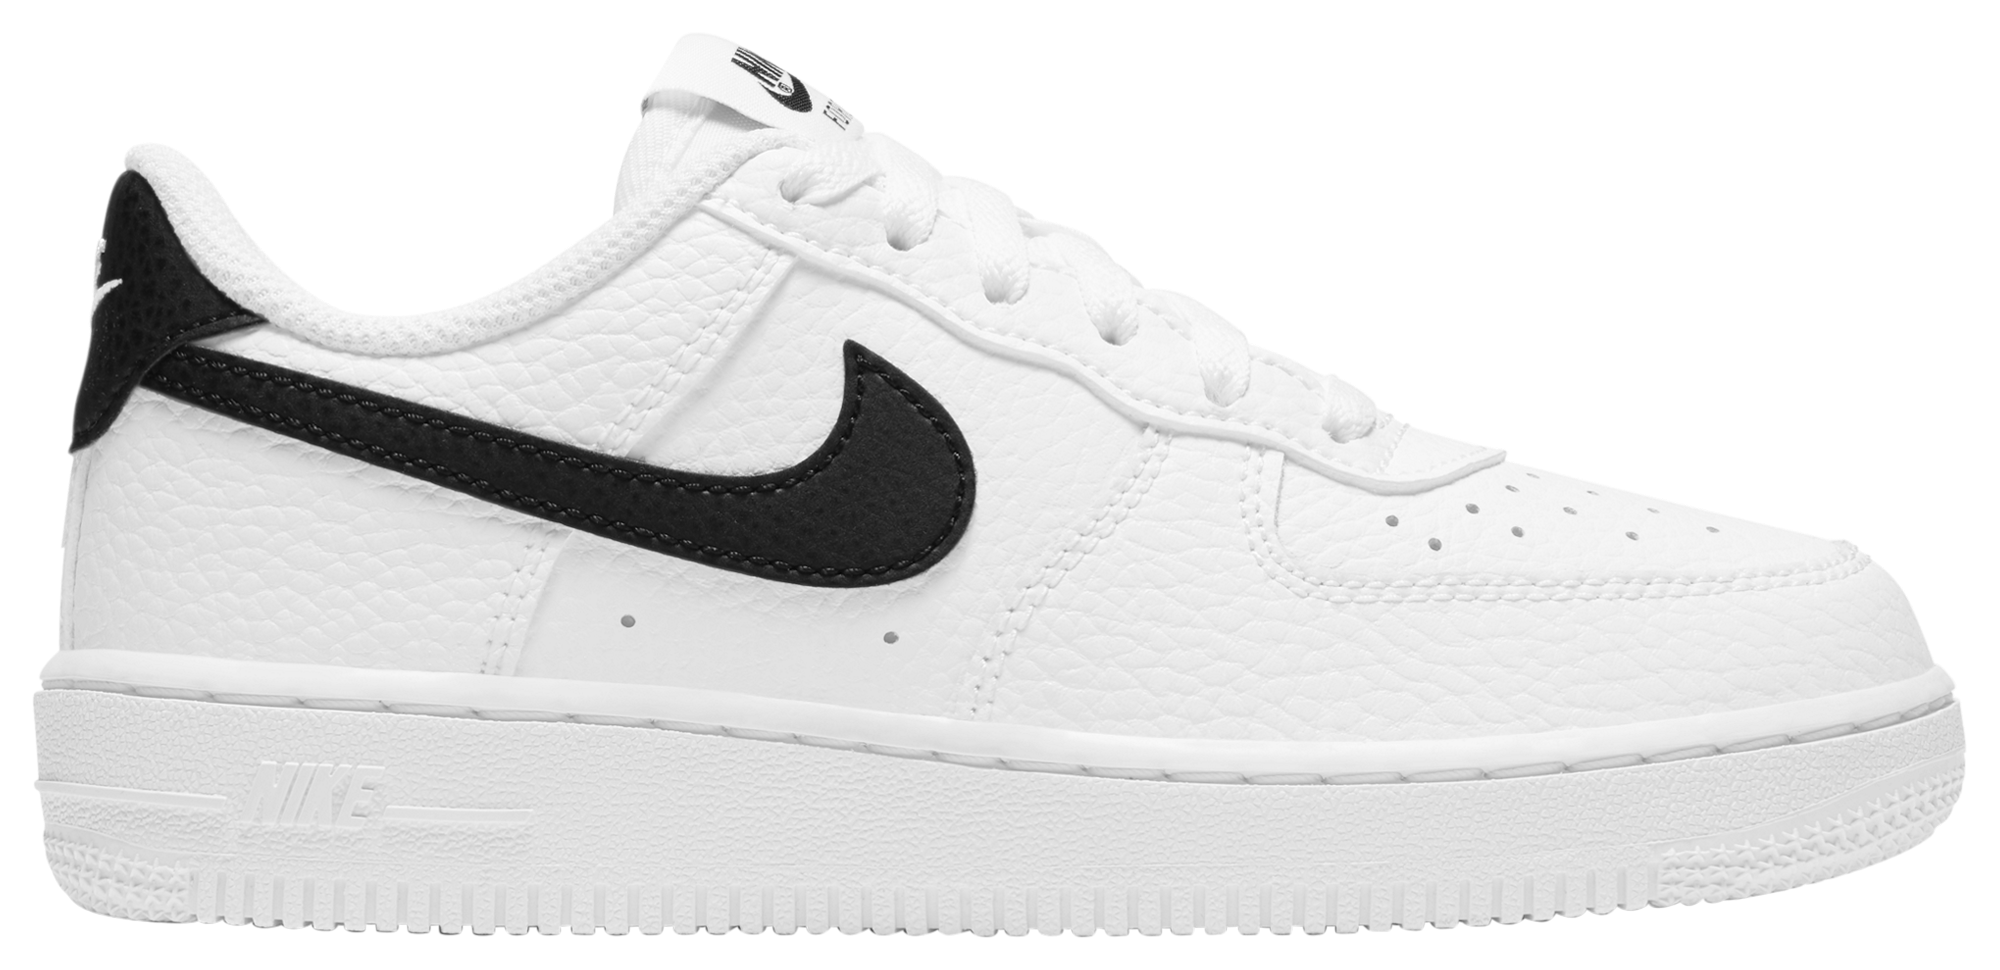 white air forces at foot locker